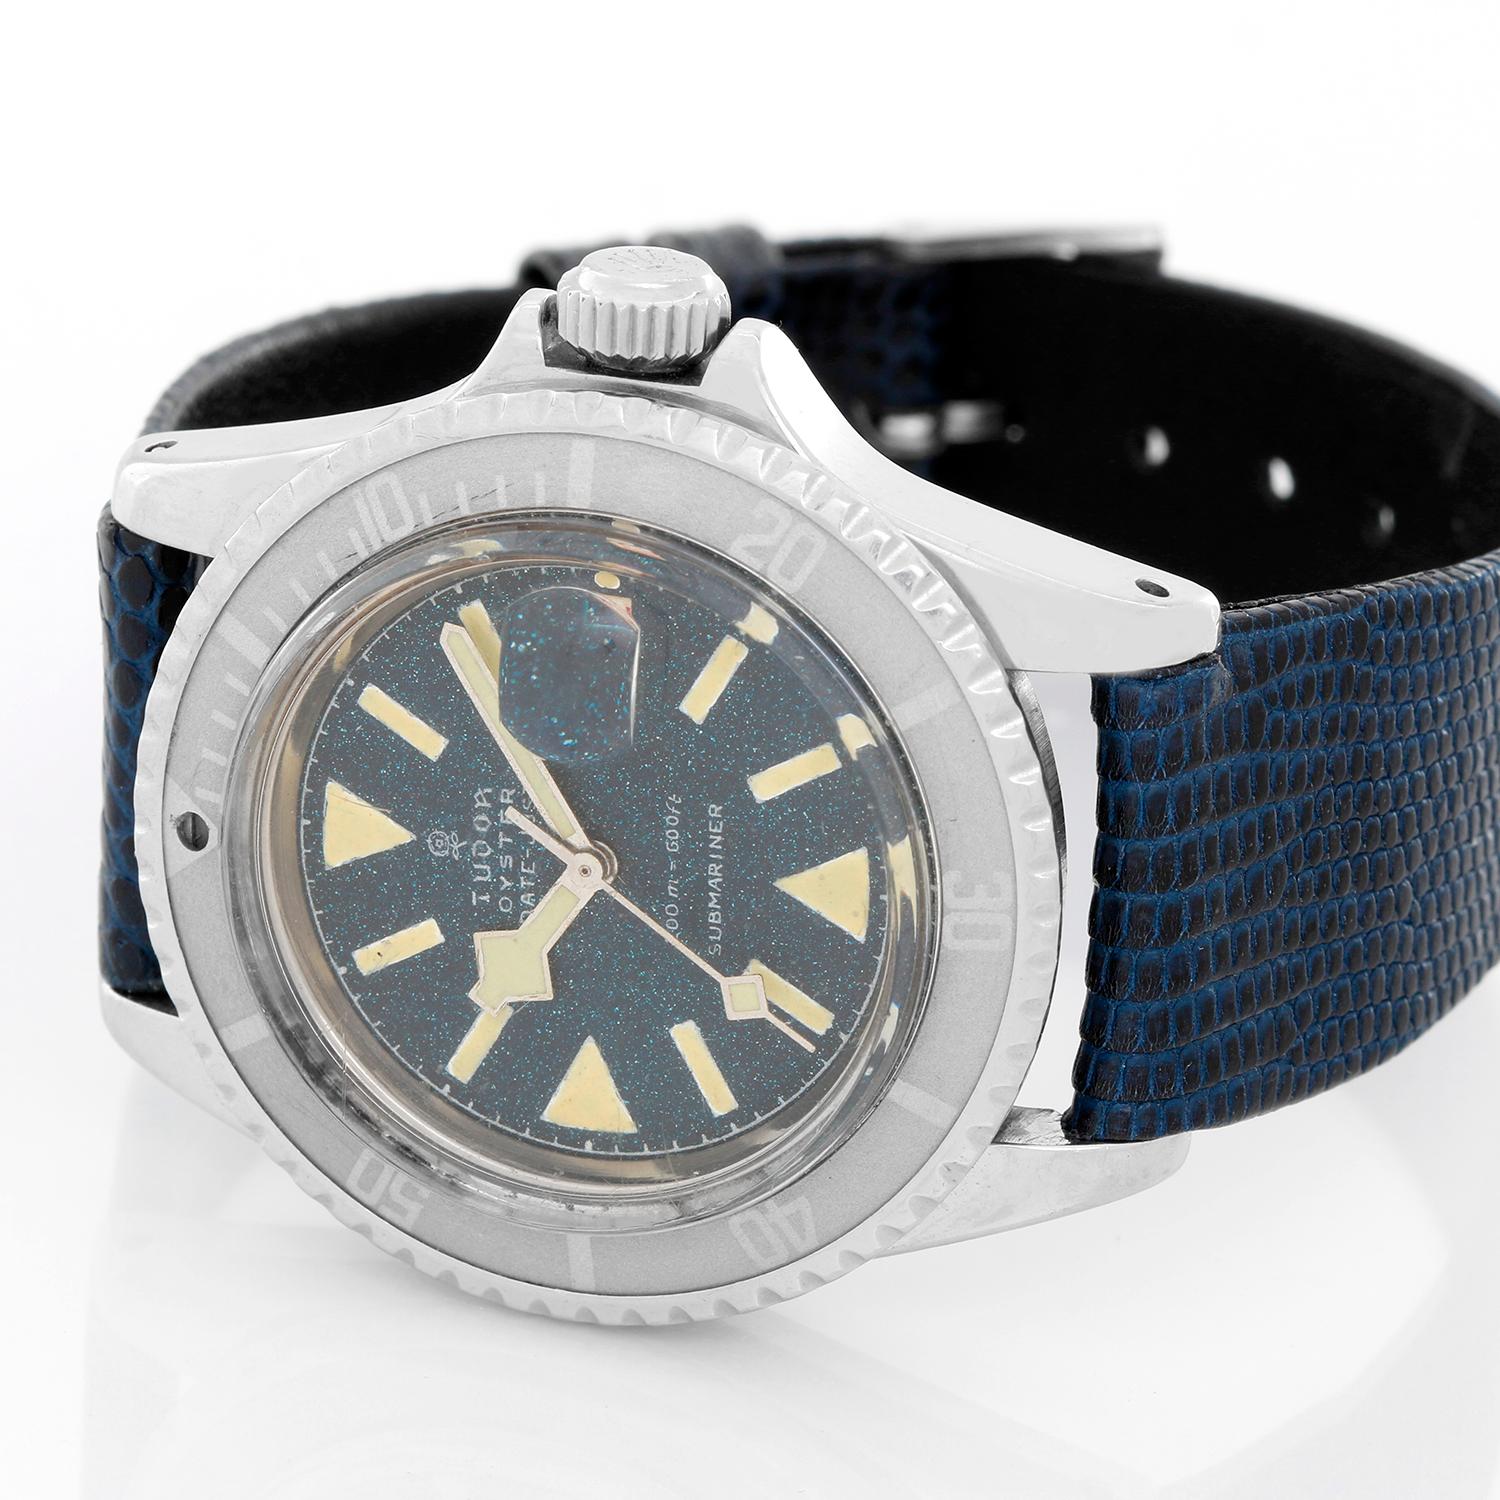 Vintage Tudor Submariner Snowflake Mens Watch - Automatic winding. Stainless steel ( 40 mm ) Ghost inlay bezel; caseback engraved with date, previous owners name and phone number. Blue snowflake dial with luminous hour markers. Blue alligator strap